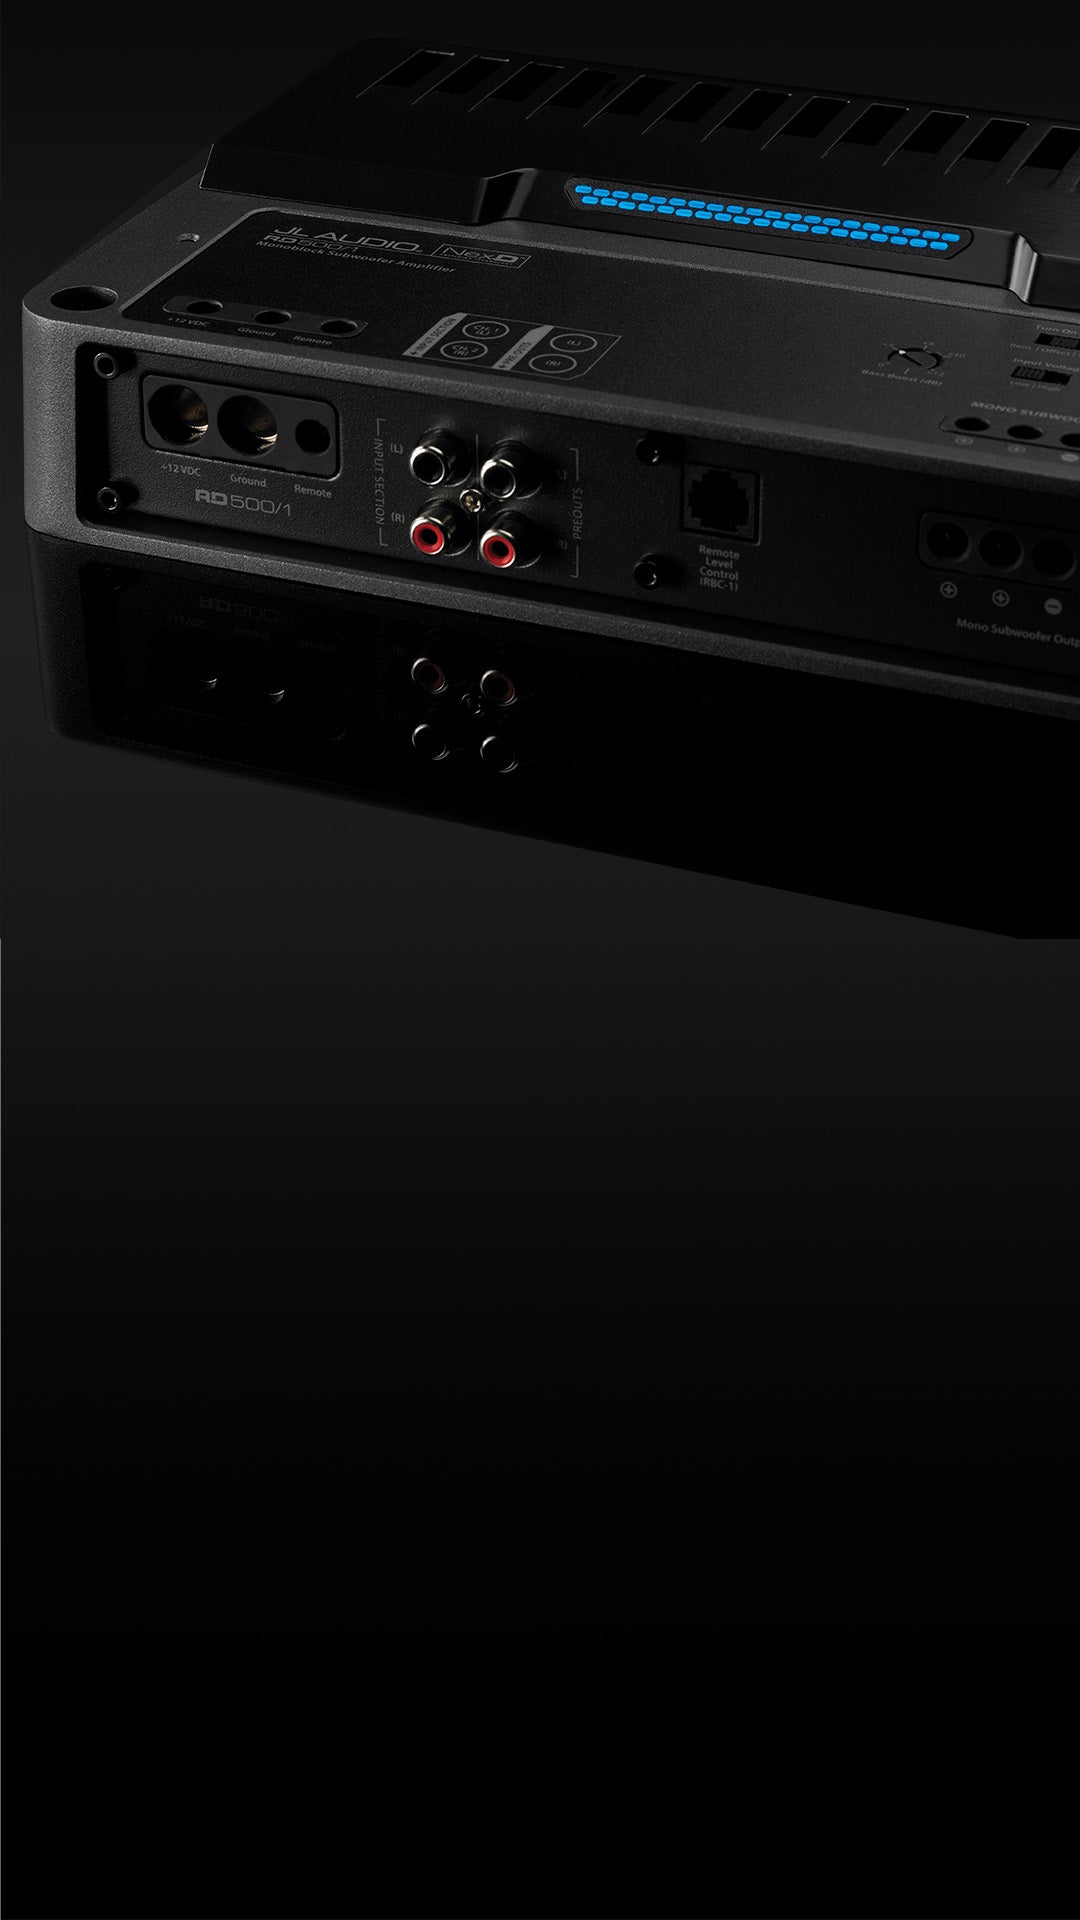 A closeup view of the input panel of an RD amplifier with the top uncovered, in a dark sleek surface. 